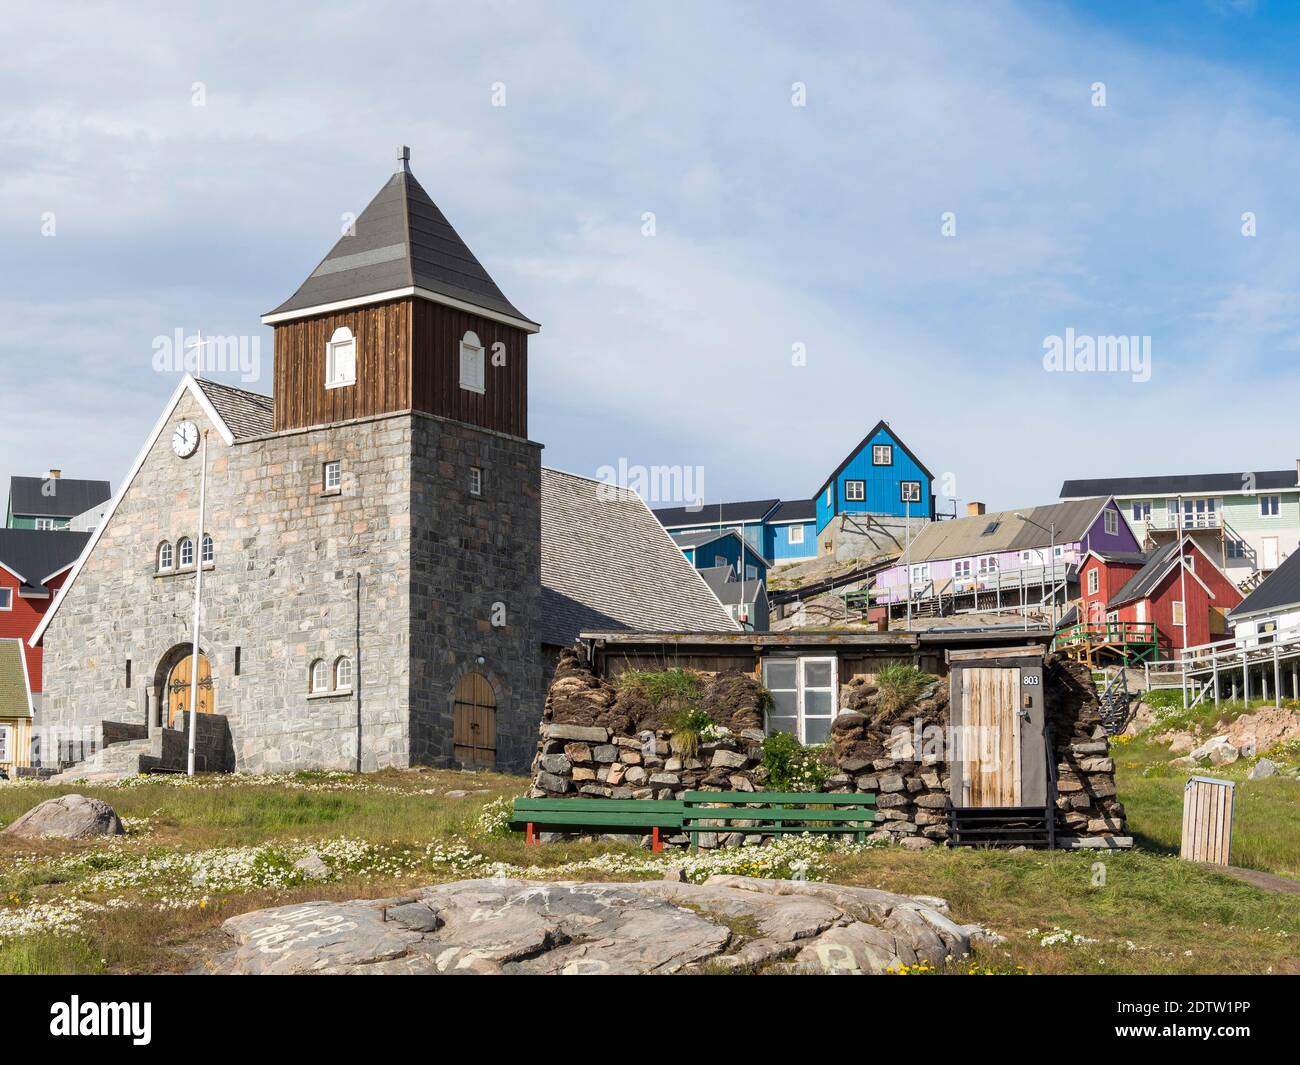 The church and a traditional peat - stone house, now part of the local museum. The town Uummannaq in the north of West Greenland, located on an island Stock Photo